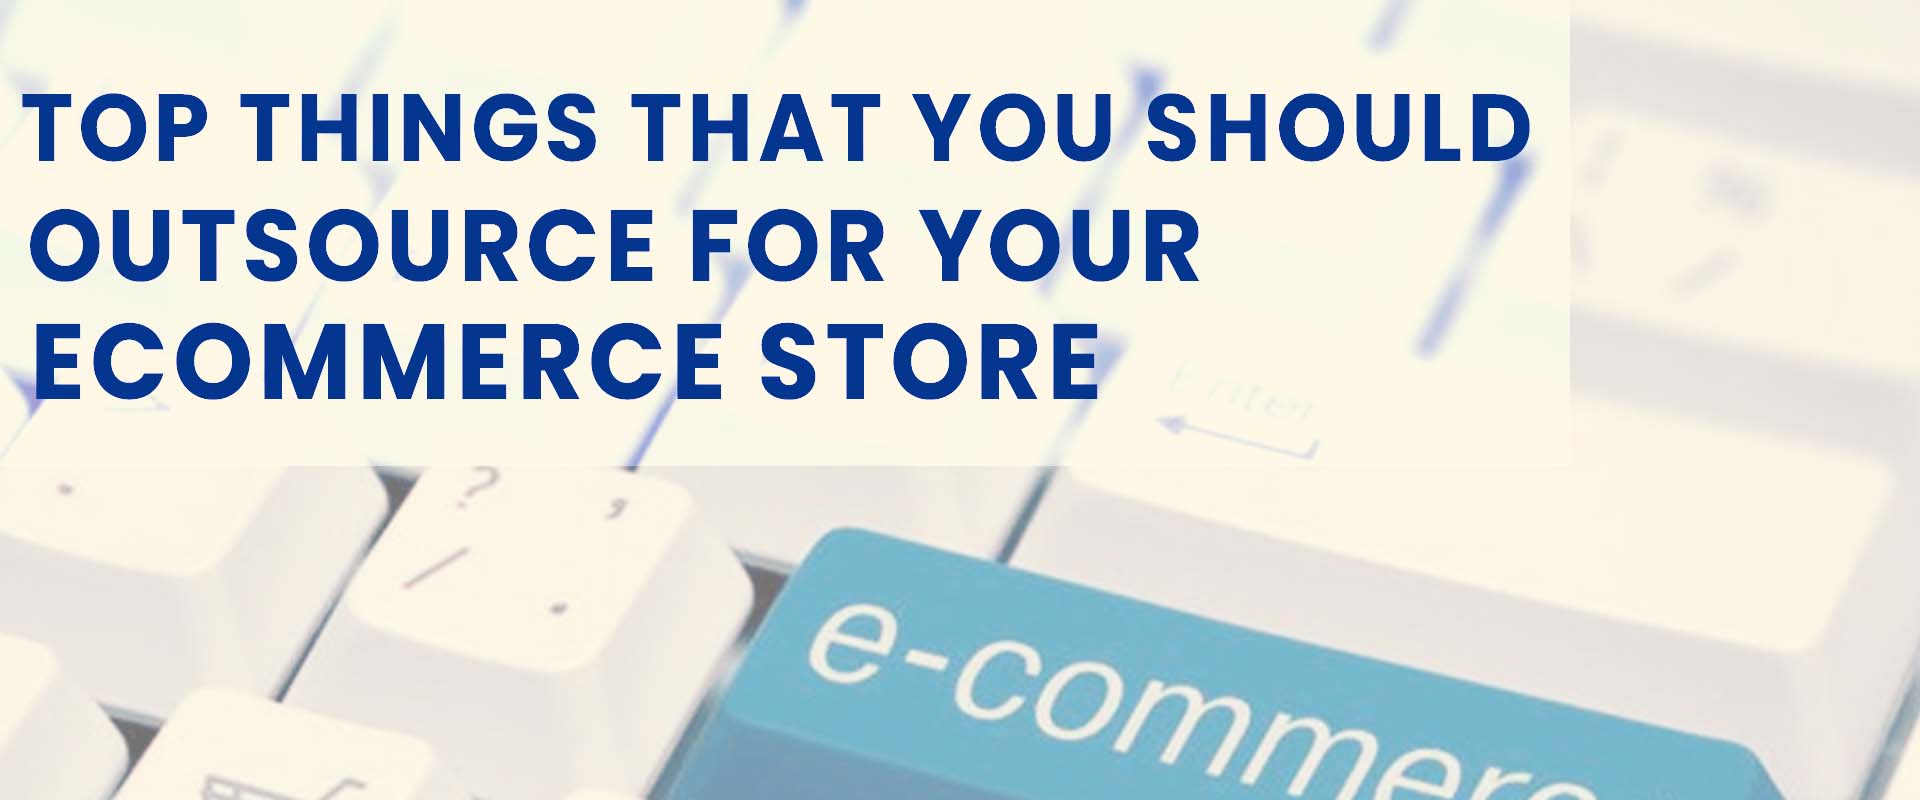 Top things that you outsource for your ecommerce